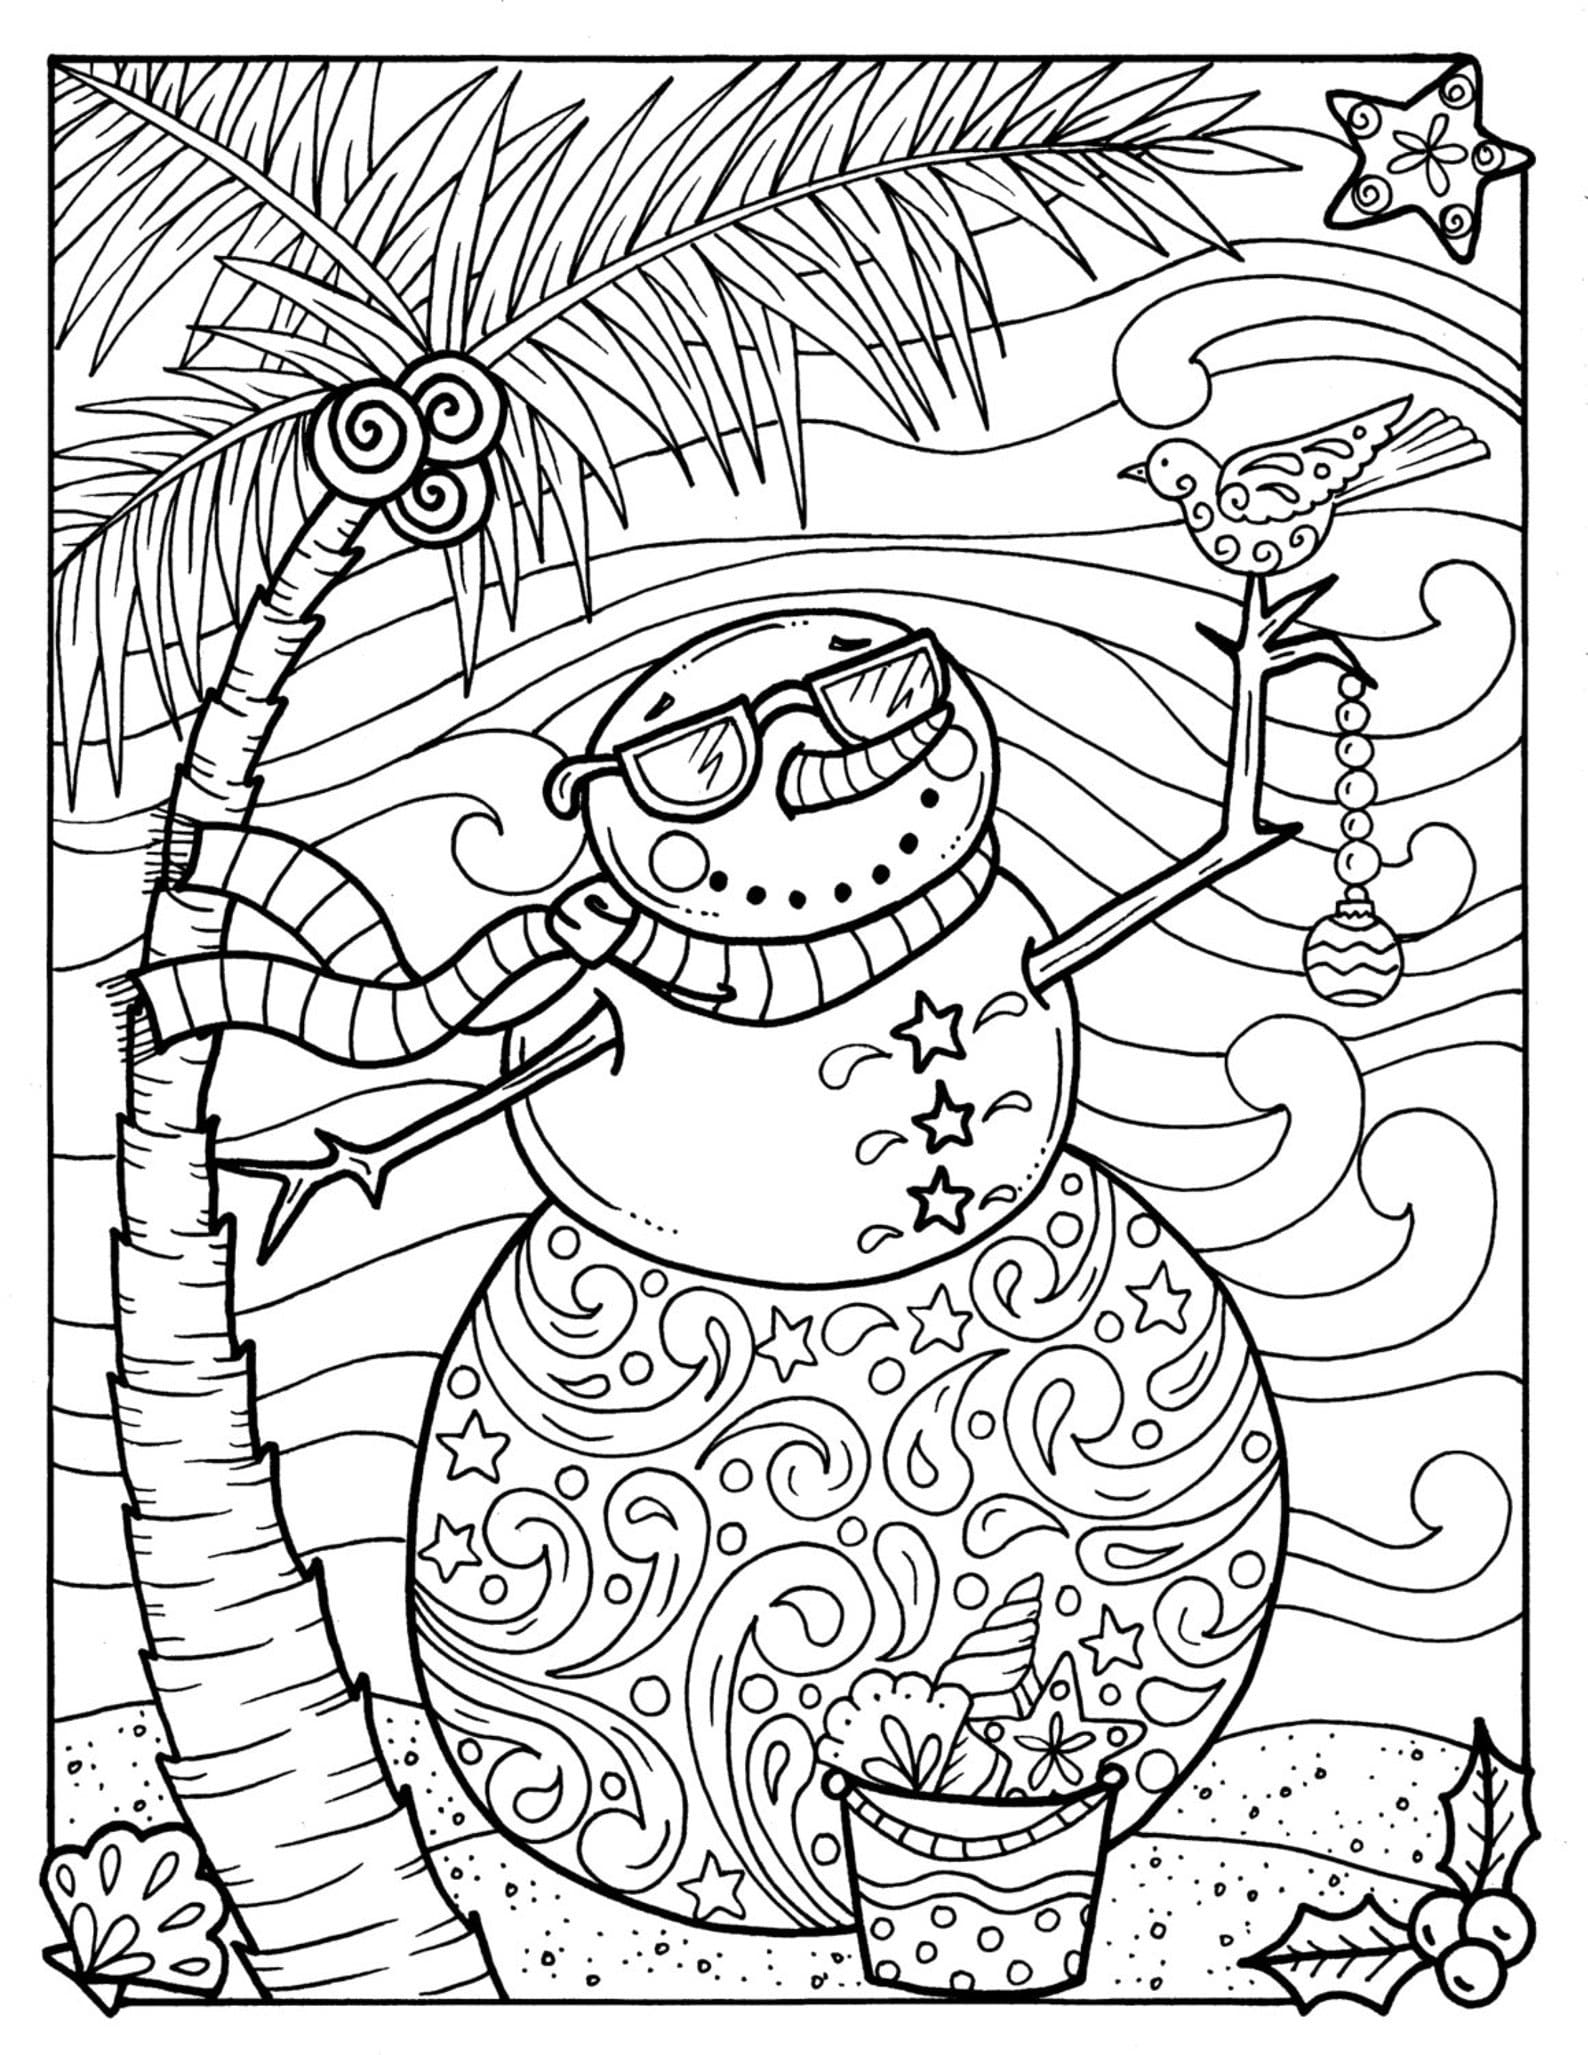 Snowman At The Resort Coloring Page